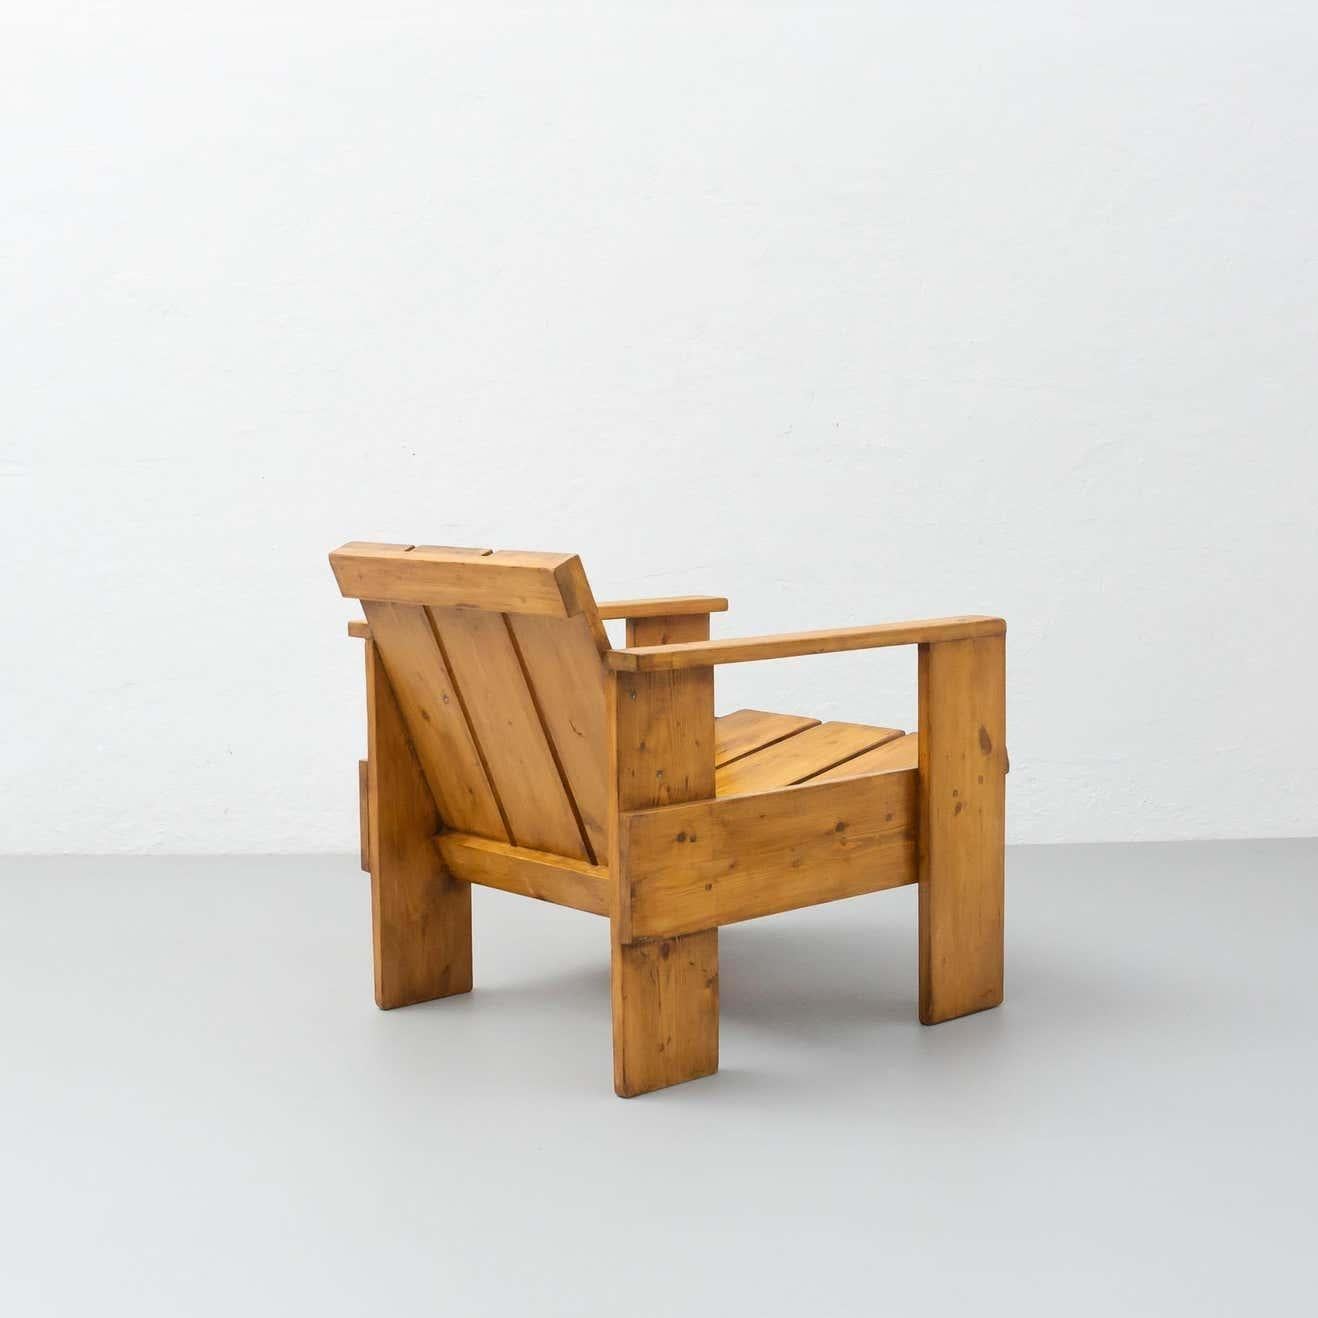 Gerrit Rietveld Mid-Century Modern Wood Crate Chair, circa 1950 In Good Condition For Sale In Barcelona, Barcelona